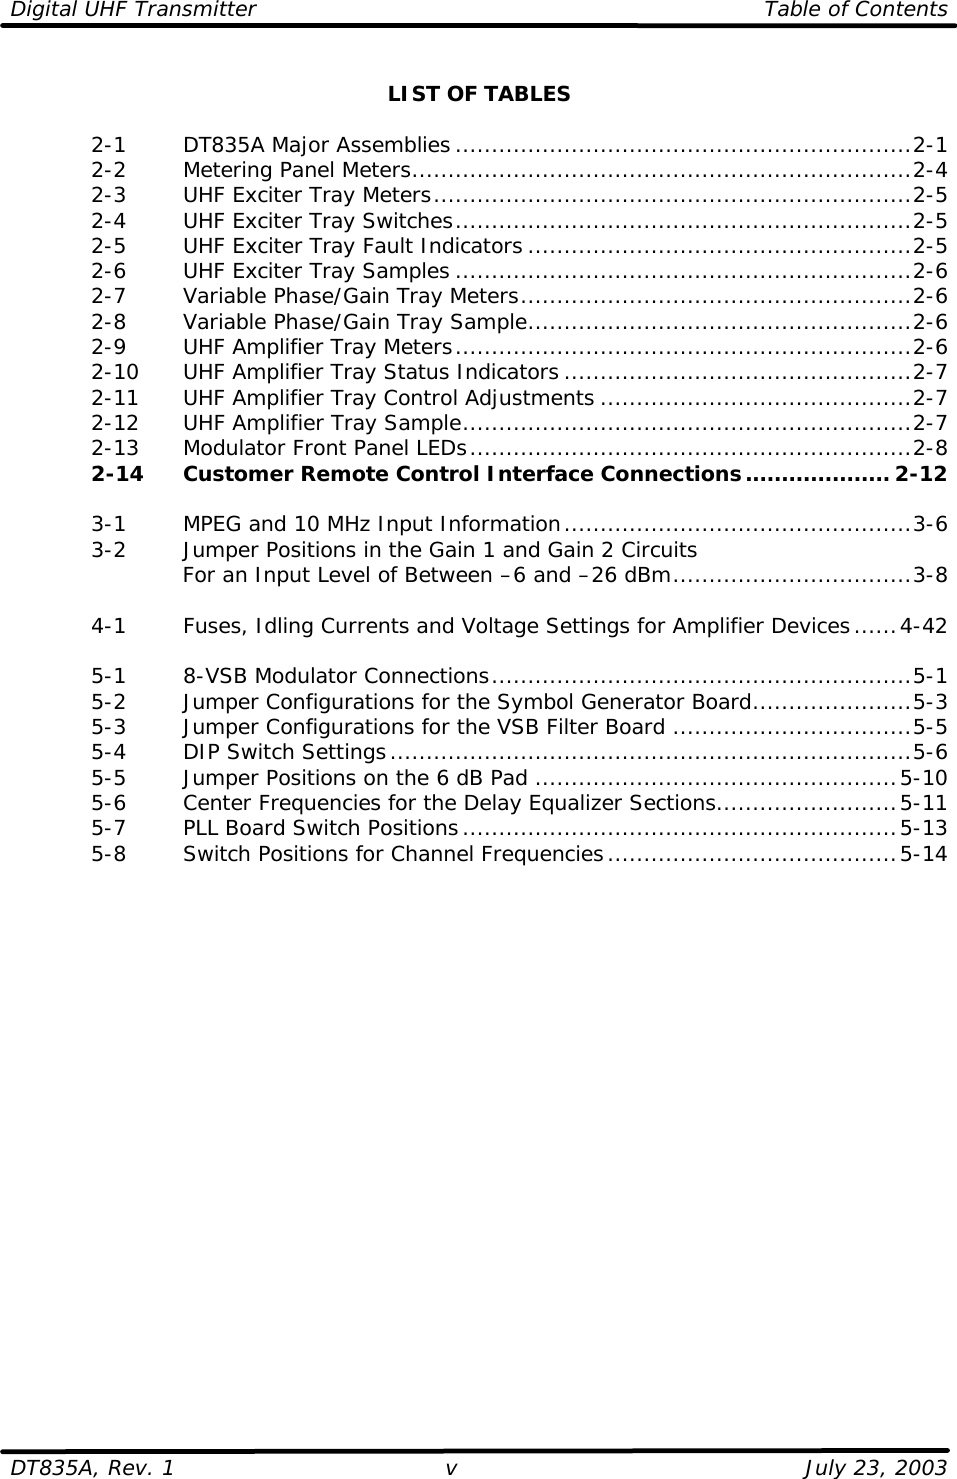 Digital UHF Transmitter Table of Contents  DT835A, Rev. 1 v July 23, 2003  LIST OF TABLES   2-1   DT835A Major Assemblies ...............................................................2-1  2-2   Metering Panel Meters.....................................................................2-4  2-3   UHF Exciter Tray Meters..................................................................2-5  2-4   UHF Exciter Tray Switches...............................................................2-5  2-5   UHF Exciter Tray Fault Indicators.....................................................2-5  2-6   UHF Exciter Tray Samples ...............................................................2-6  2-7   Variable Phase/Gain Tray Meters......................................................2-6  2-8   Variable Phase/Gain Tray Sample.....................................................2-6  2-9   UHF Amplifier Tray Meters...............................................................2-6  2-10 UHF Amplifier Tray Status Indicators................................................2-7  2-11 UHF Amplifier Tray Control Adjustments ...........................................2-7  2-12 UHF Amplifier Tray Sample..............................................................2-7  2-13 Modulator Front Panel LEDs.............................................................2-8  2-14 Customer Remote Control Interface Connections.................... 2-12   3-1   MPEG and 10 MHz Input Information................................................3-6  3-2   Jumper Positions in the Gain 1 and Gain 2 Circuits For an Input Level of Between –6 and –26 dBm.................................3-8     4-1   Fuses, Idling Currents and Voltage Settings for Amplifier Devices......4-42   5-1   8-VSB Modulator Connections..........................................................5-1  5-2   Jumper Configurations for the Symbol Generator Board......................5-3  5-3   Jumper Configurations for the VSB Filter Board .................................5-5  5-4   DIP Switch Settings........................................................................5-6  5-5   Jumper Positions on the 6 dB Pad ..................................................5-10  5-6   Center Frequencies for the Delay Equalizer Sections.........................5-11  5-7   PLL Board Switch Positions............................................................5-13  5-8   Switch Positions for Channel Frequencies........................................5-14  